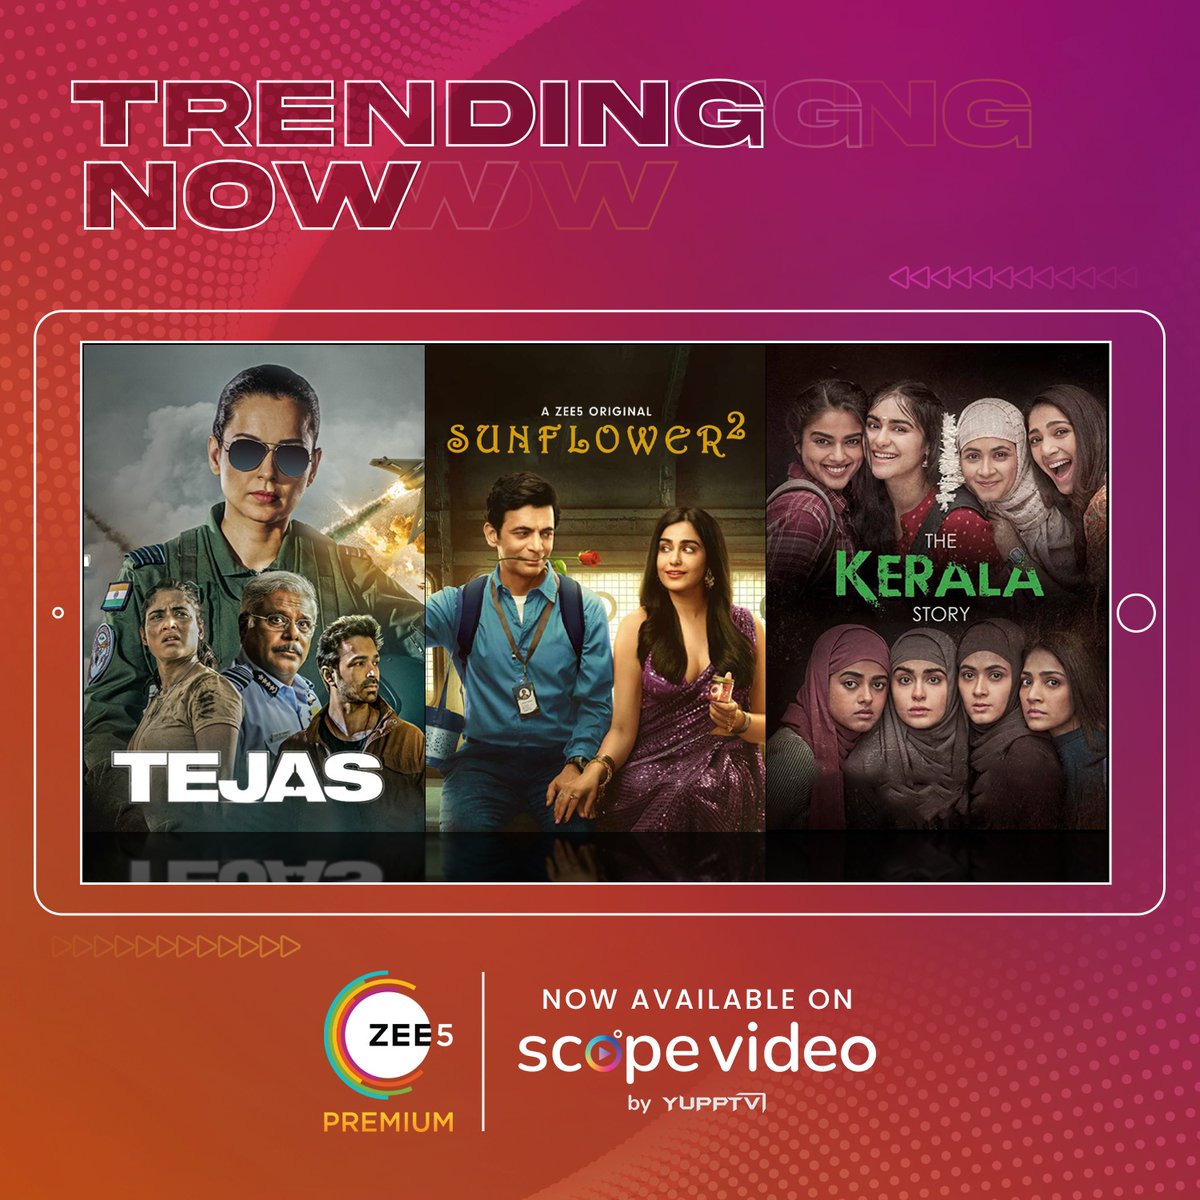 Trending NOW▶️

Watch all the latest blockbuster movies now streaming on ZEE5, available with Scope Video. 

partners.scopevideo.com yupptv.la/subscribe

#OTT #new #Tejas #thekeralastory #thekeralastoryonzee5 #sunflowers2 #New #latest